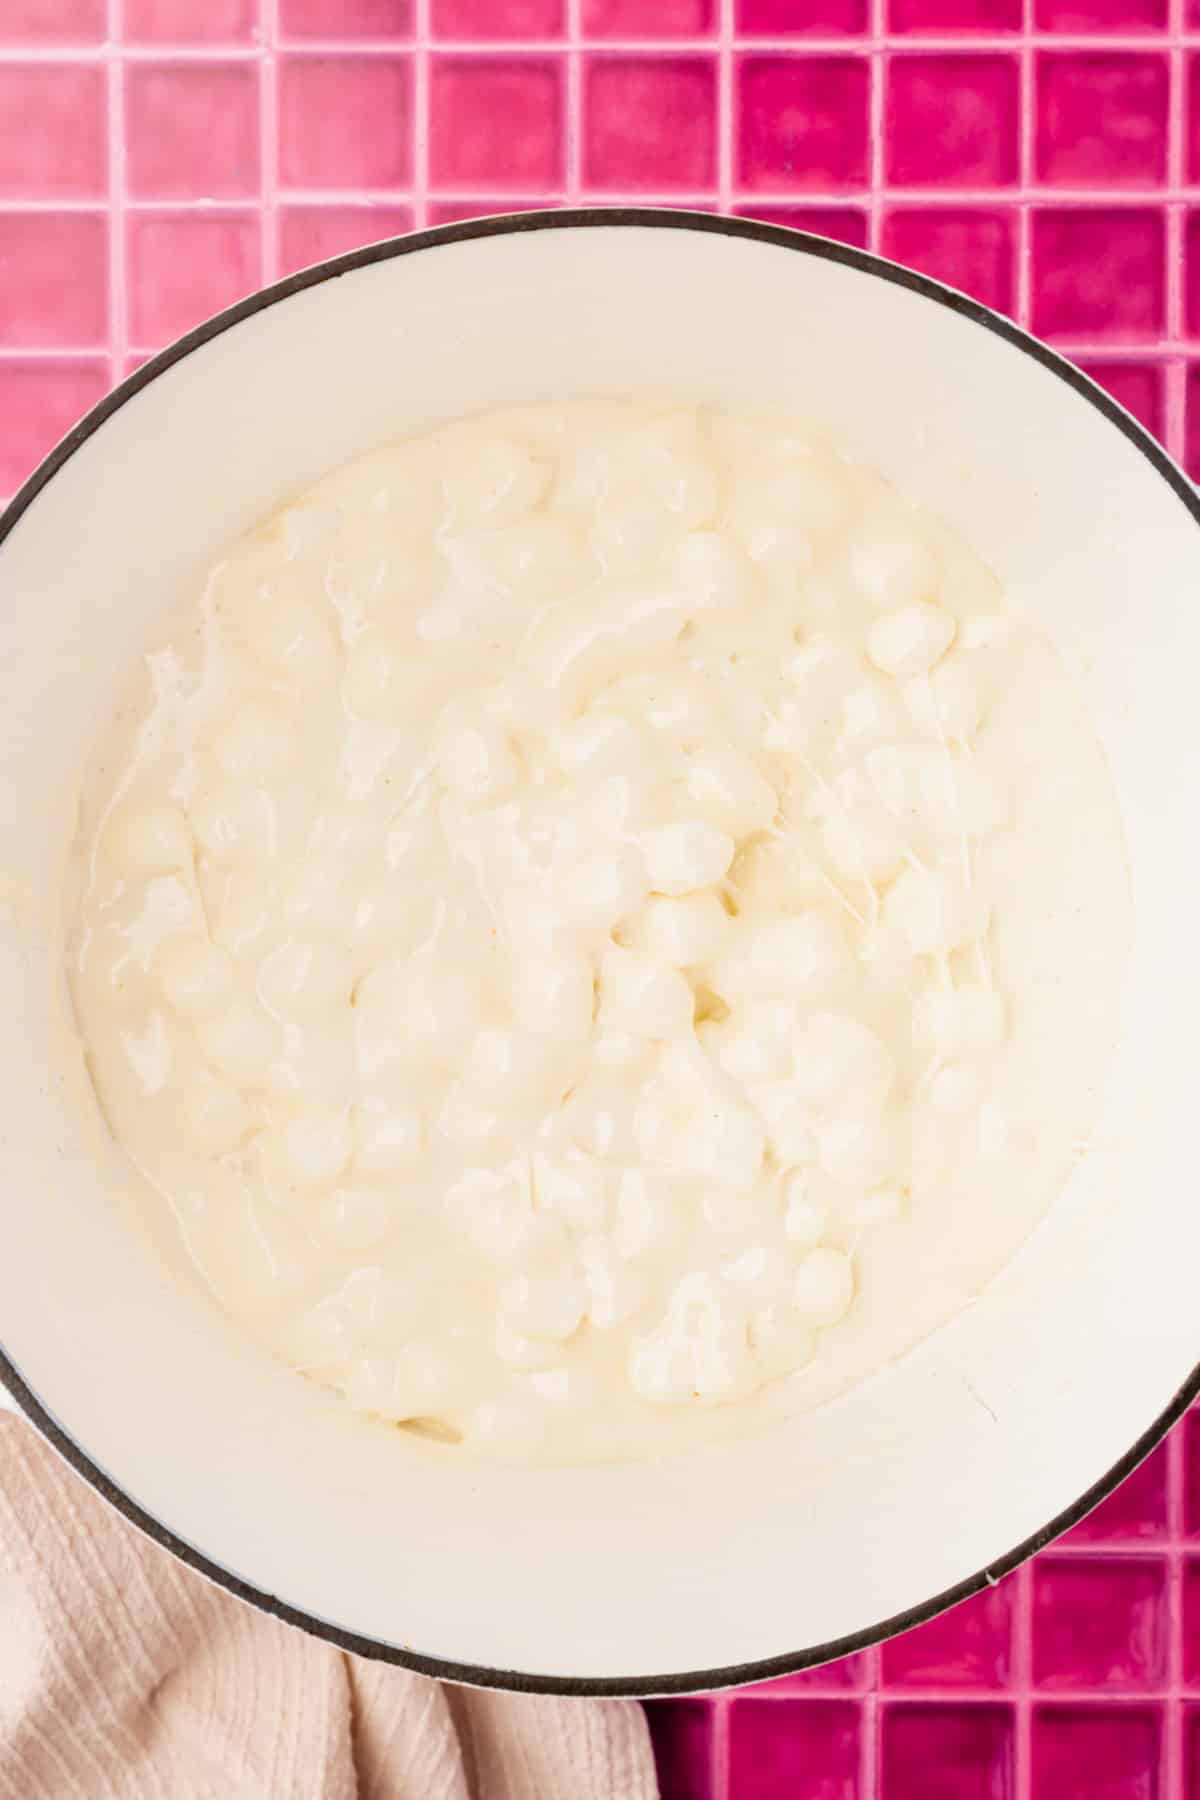 A white dutch oven filled with semi-melted marshmallows.